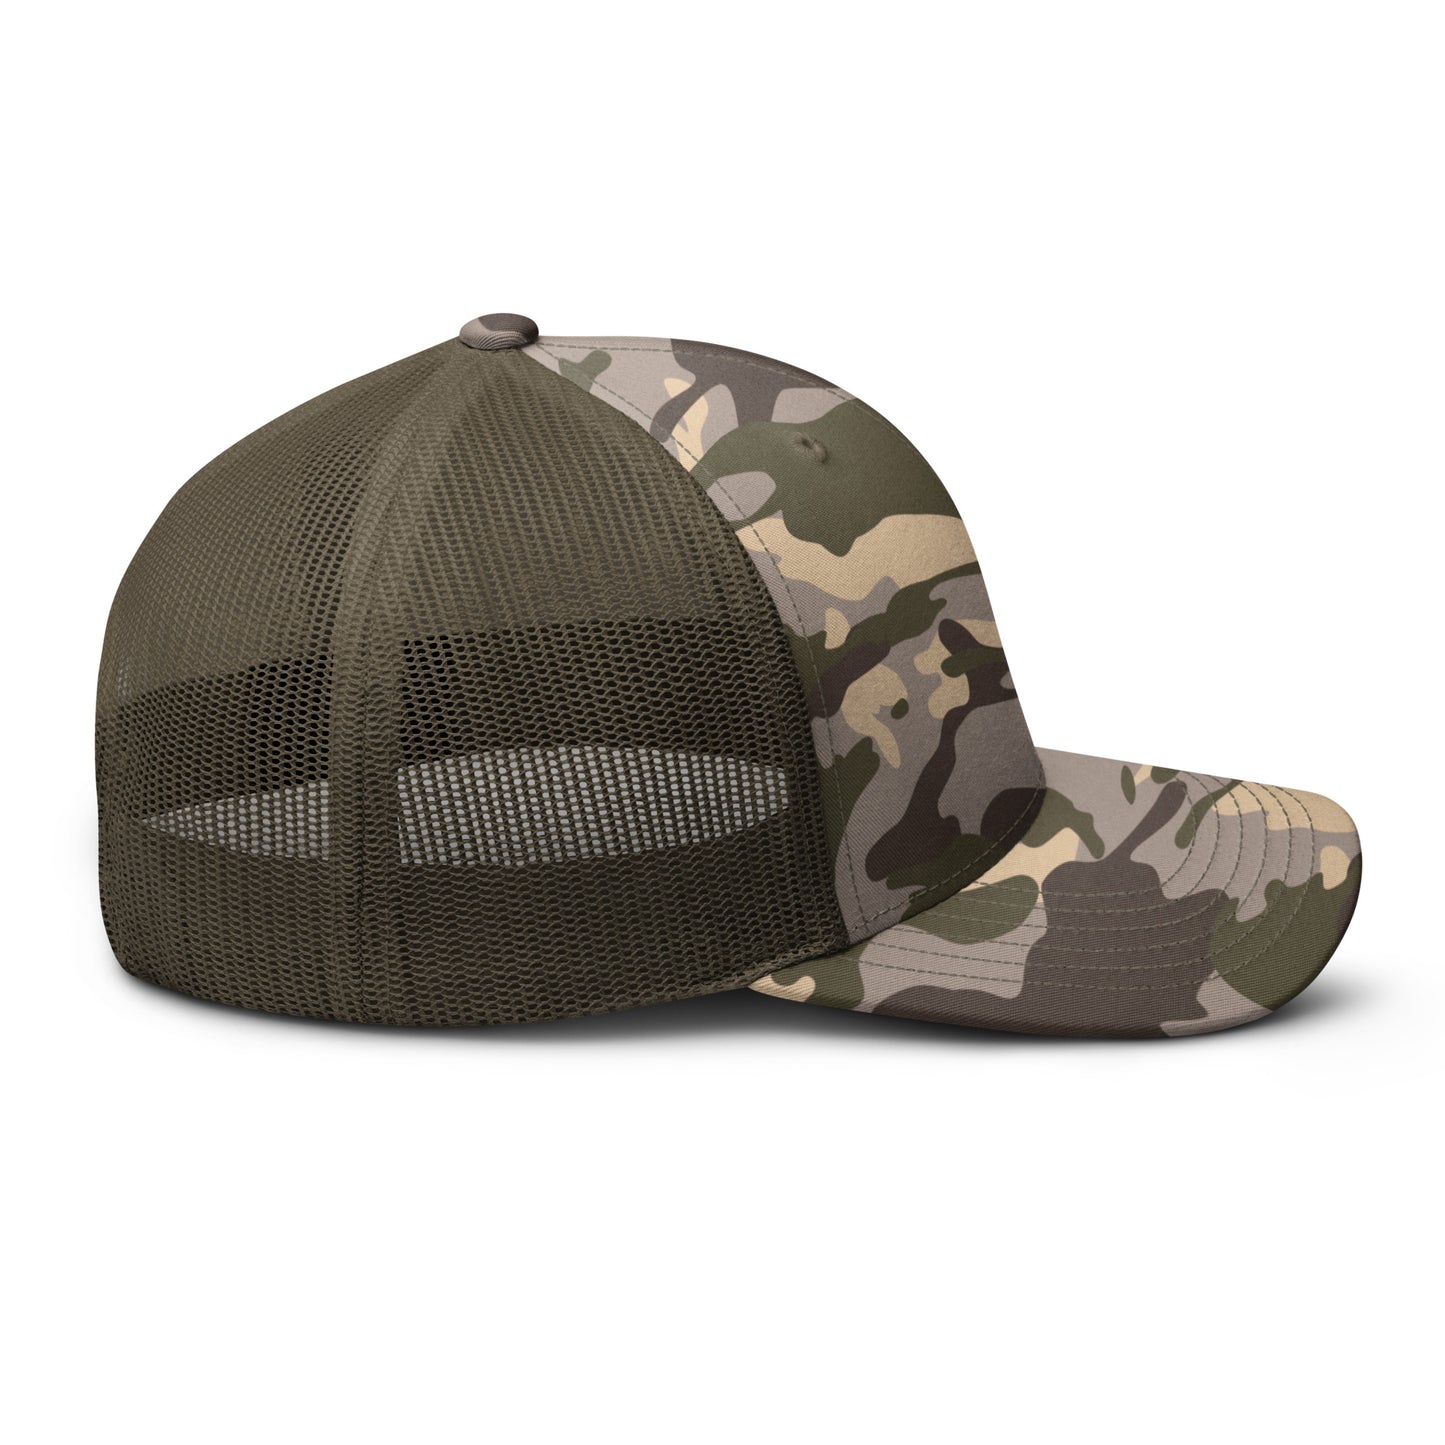 40 Mike Mikes Camouflage trucker hat